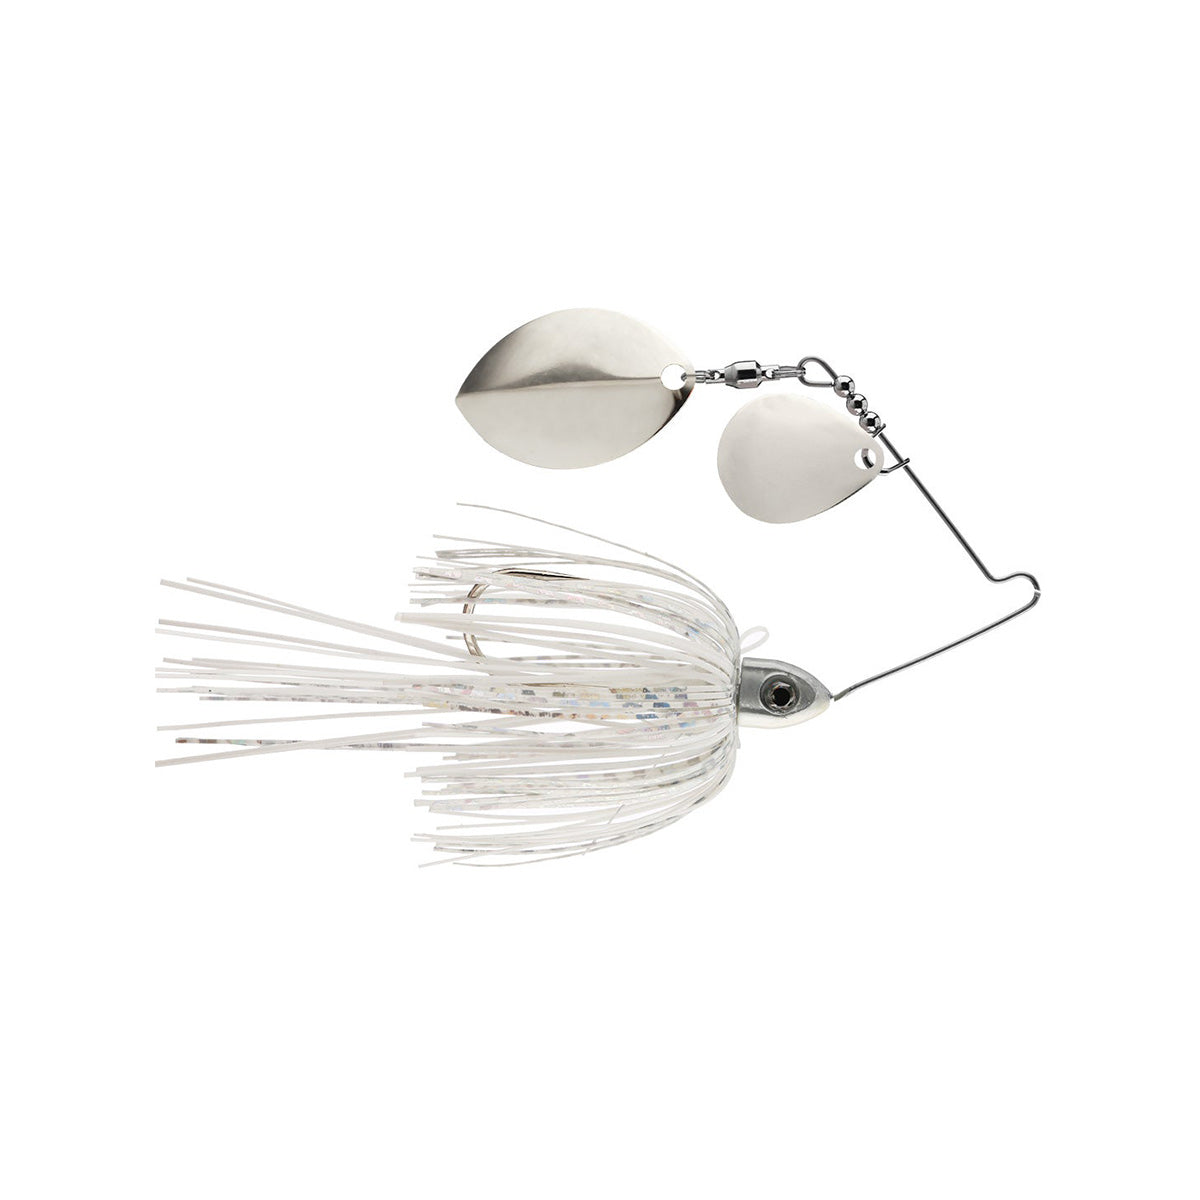 Rapid Fire Double Willow Spinnerbait_White - Nickel/Nickel